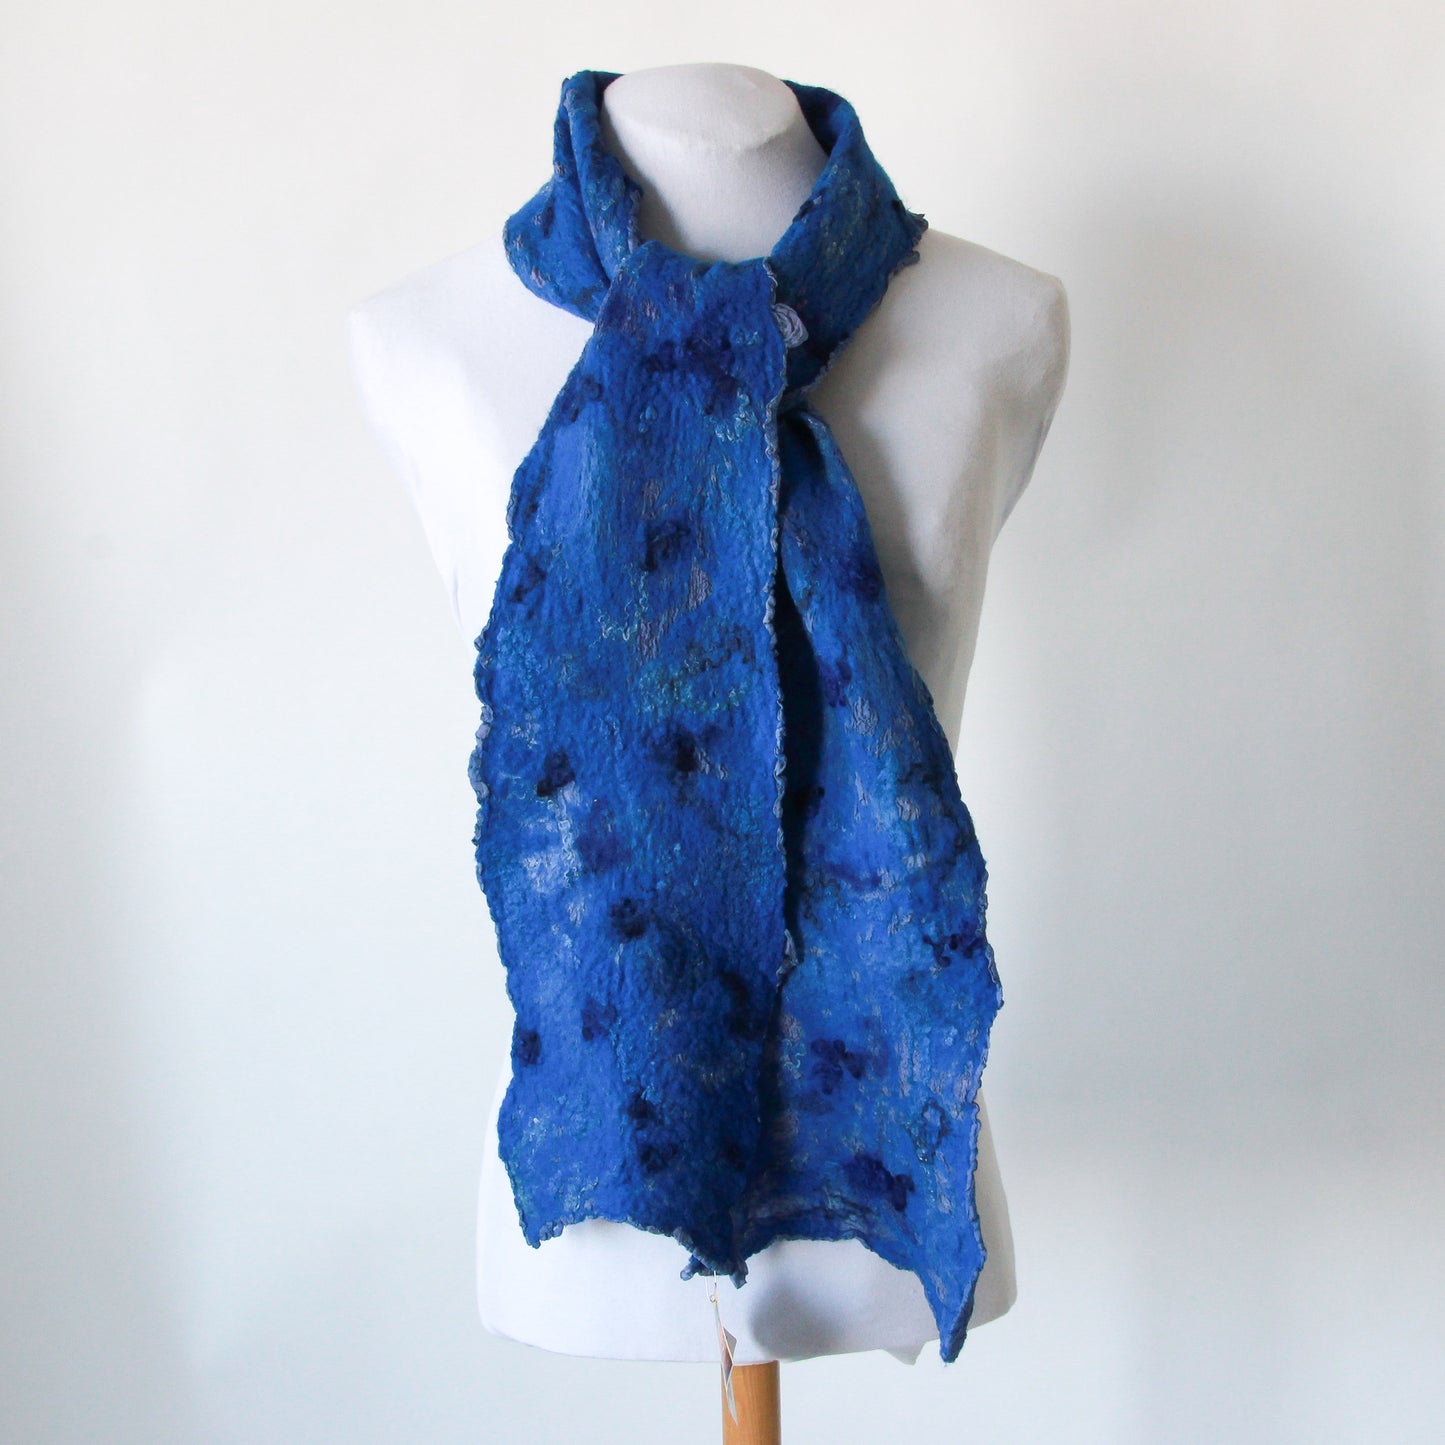 Nuno Felted Scarves